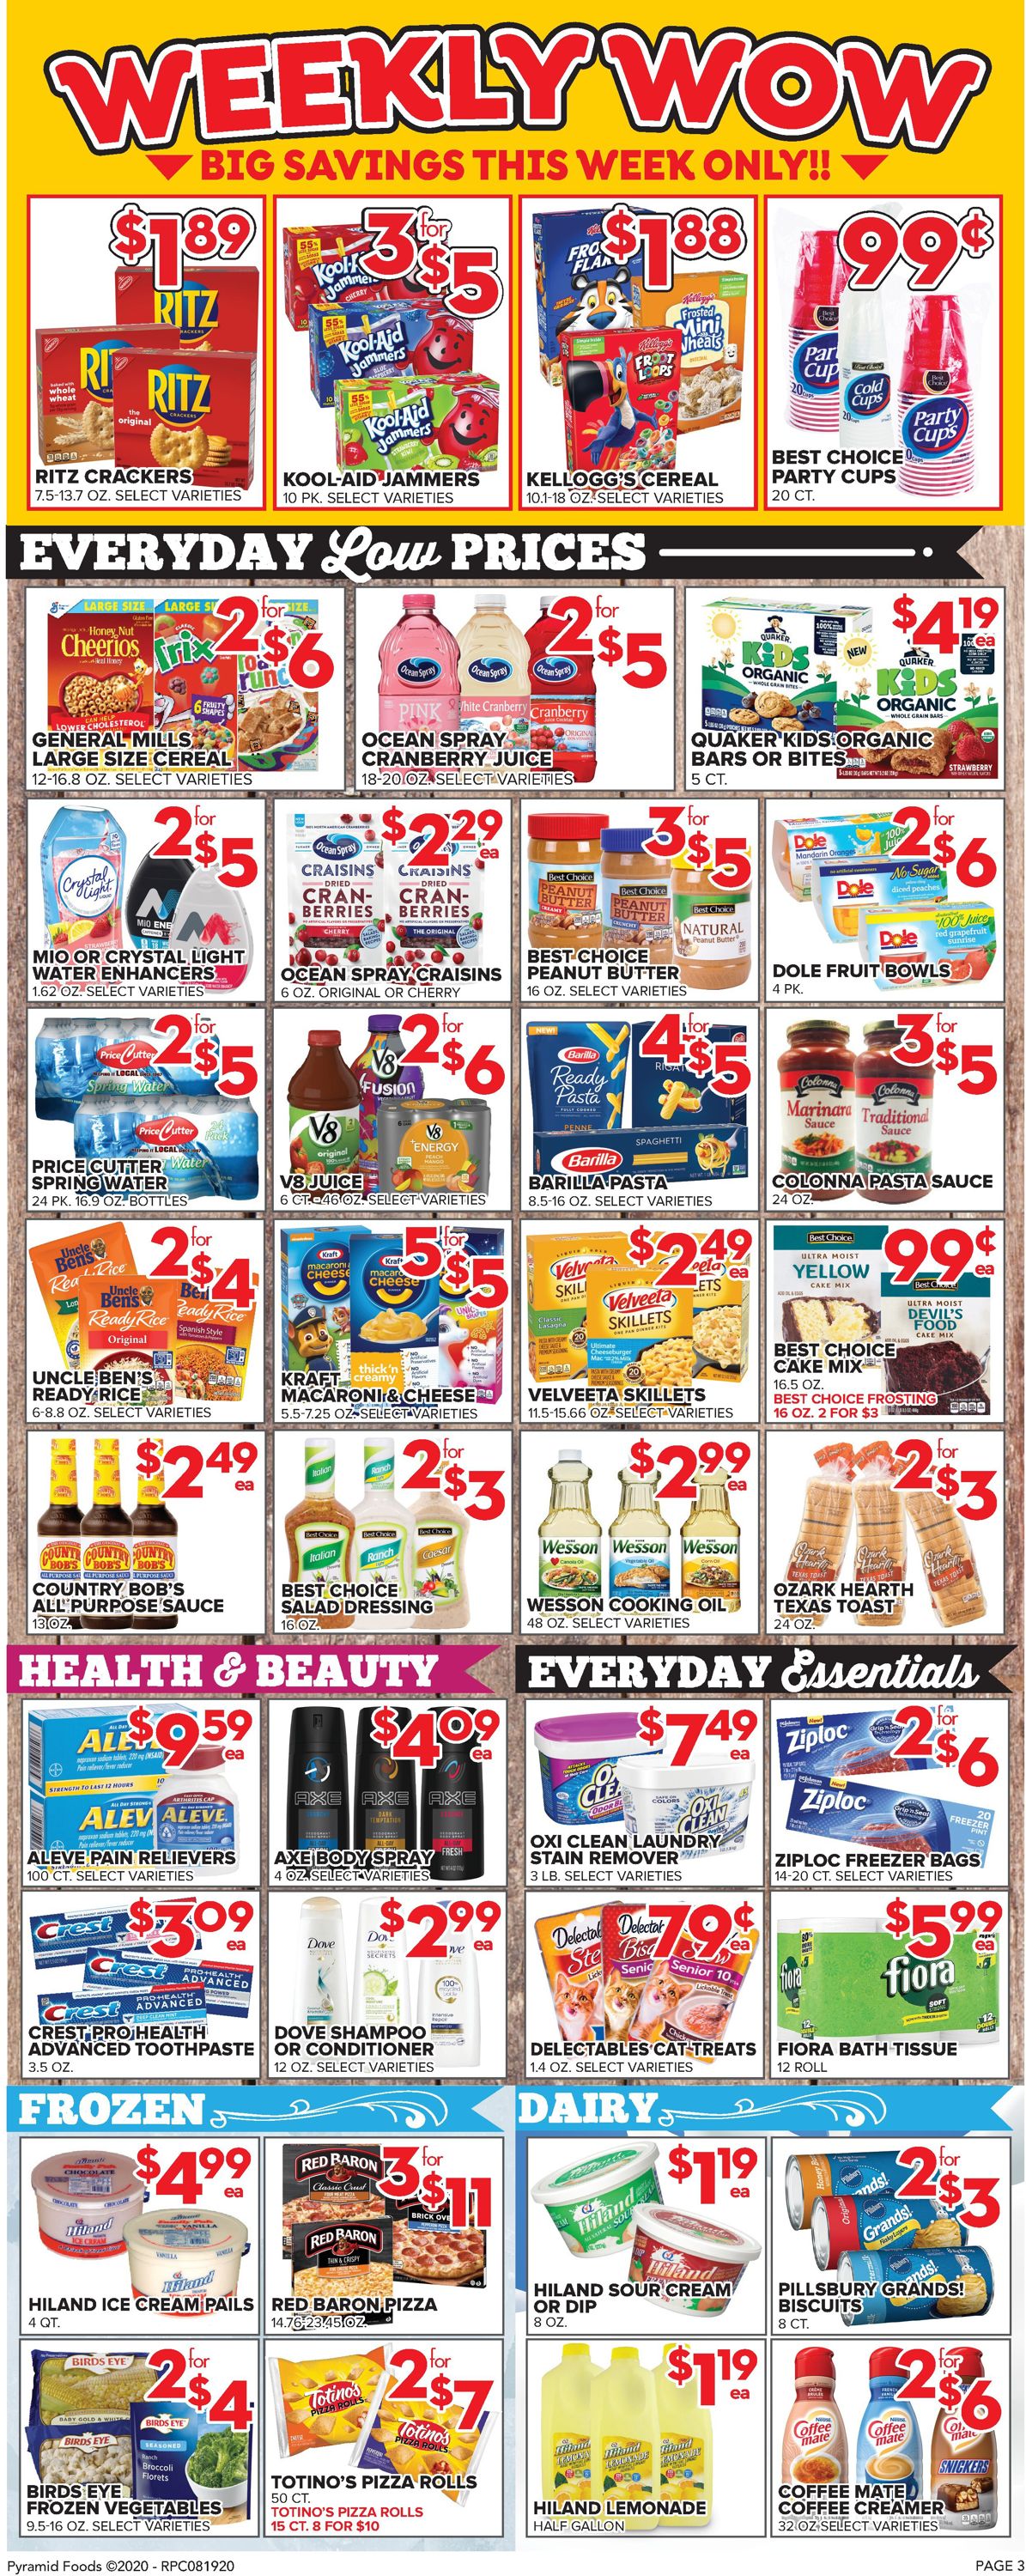 Price Cutter Weekly Ad Circular - valid 08/19-08/25/2020 (Page 3)